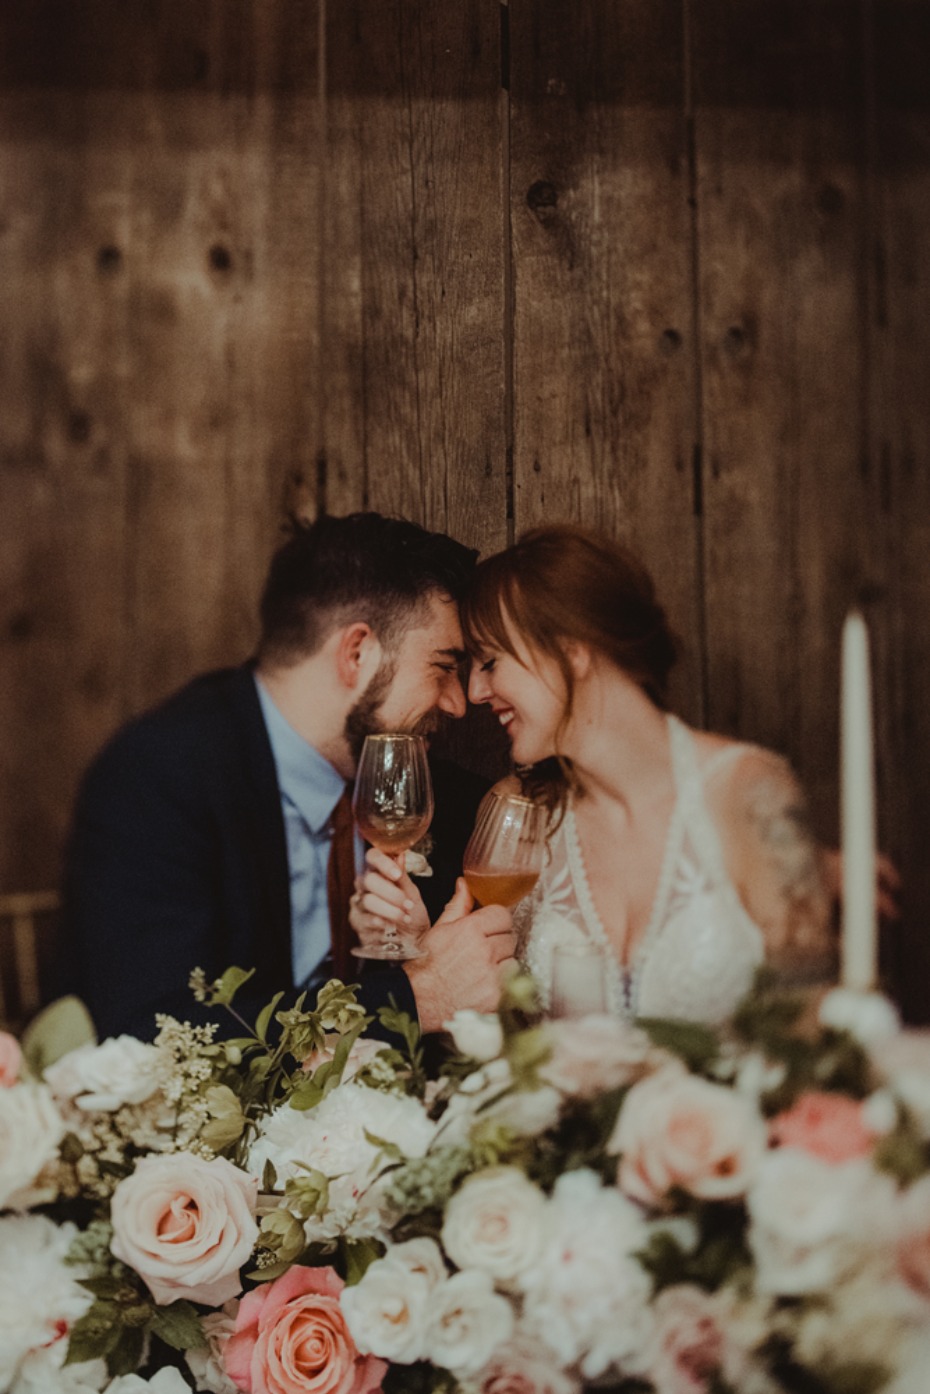 Couple drinking wine photo by anna caitlin photography